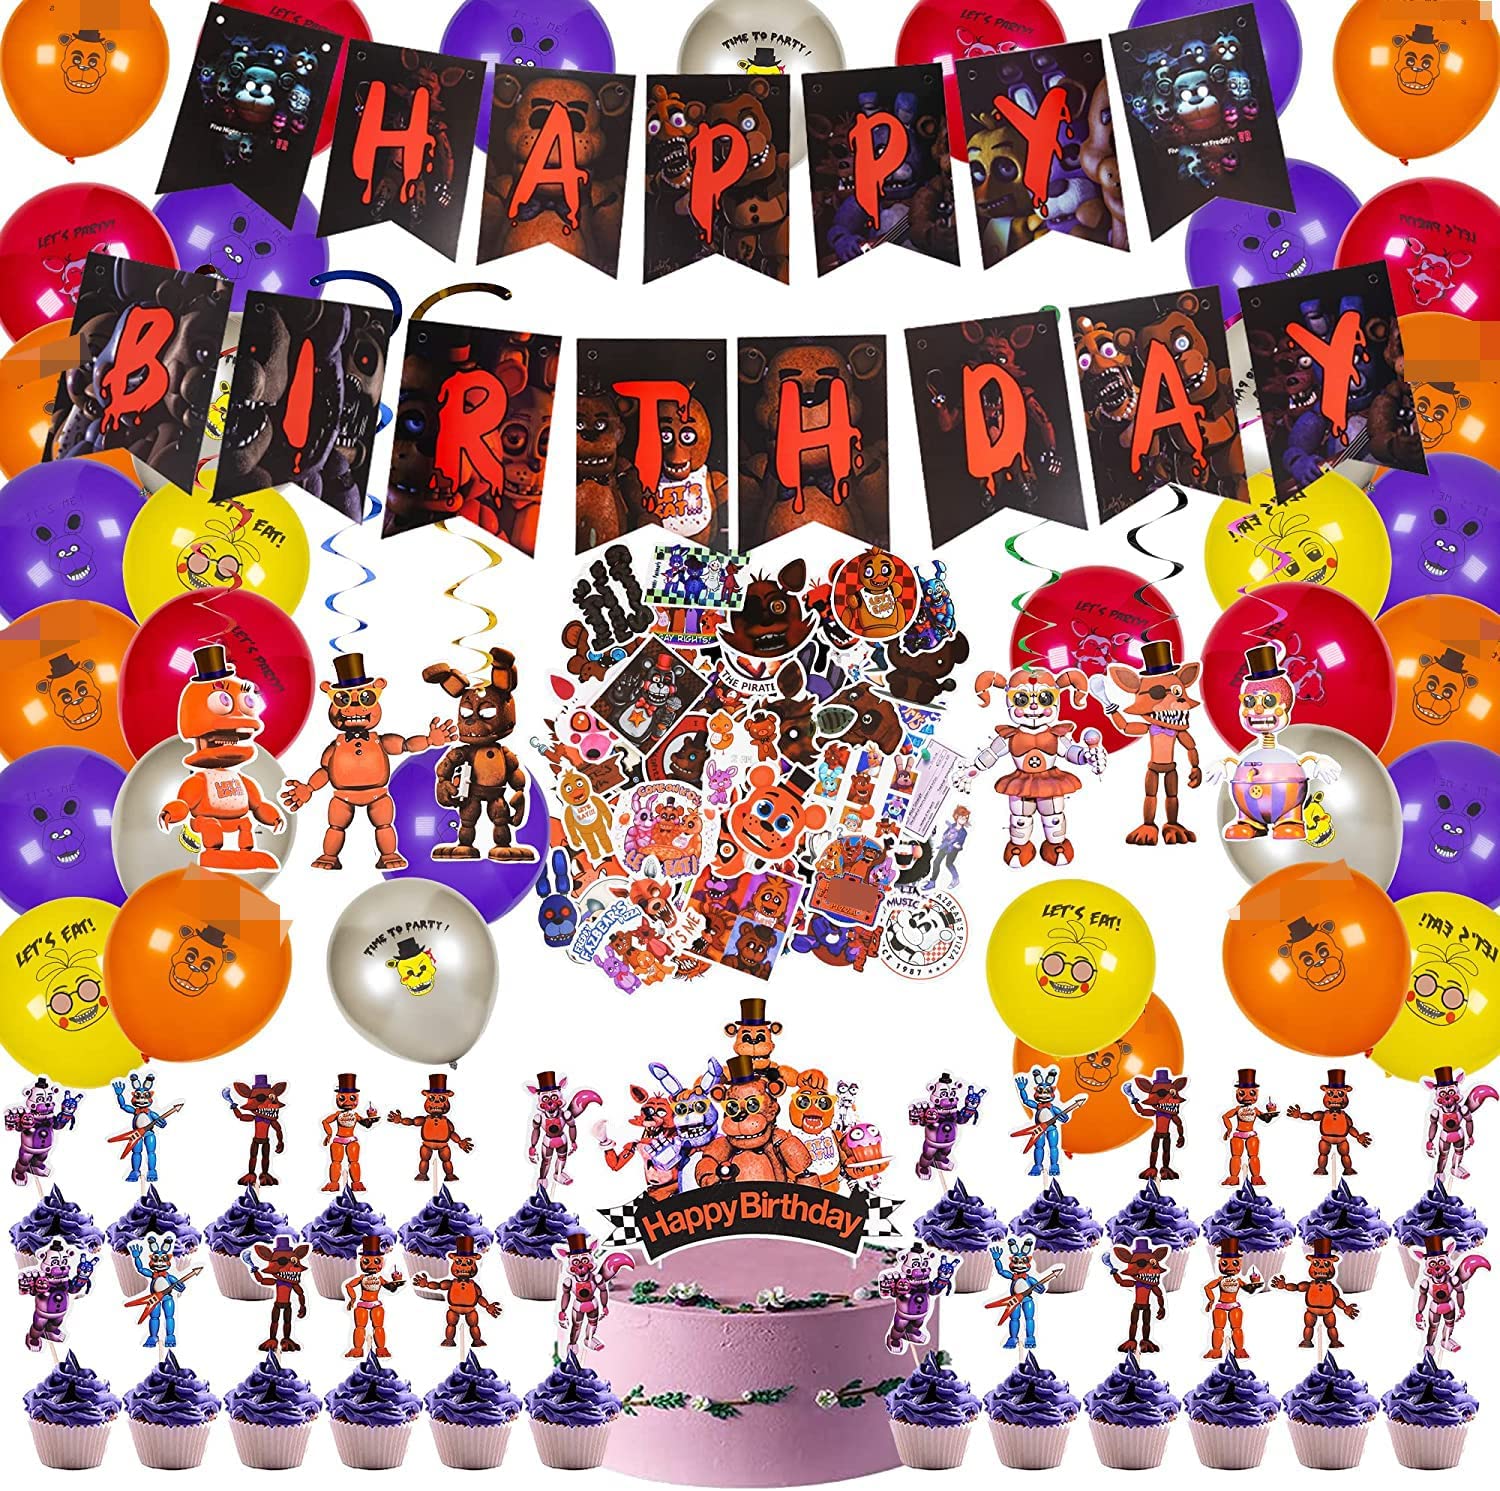 Five Nights at Freddys Birthday Party Decorations Backdrop, Party Supplies  for Kids Photo Background with 8pcs Ballons and 50 pcs Stickers